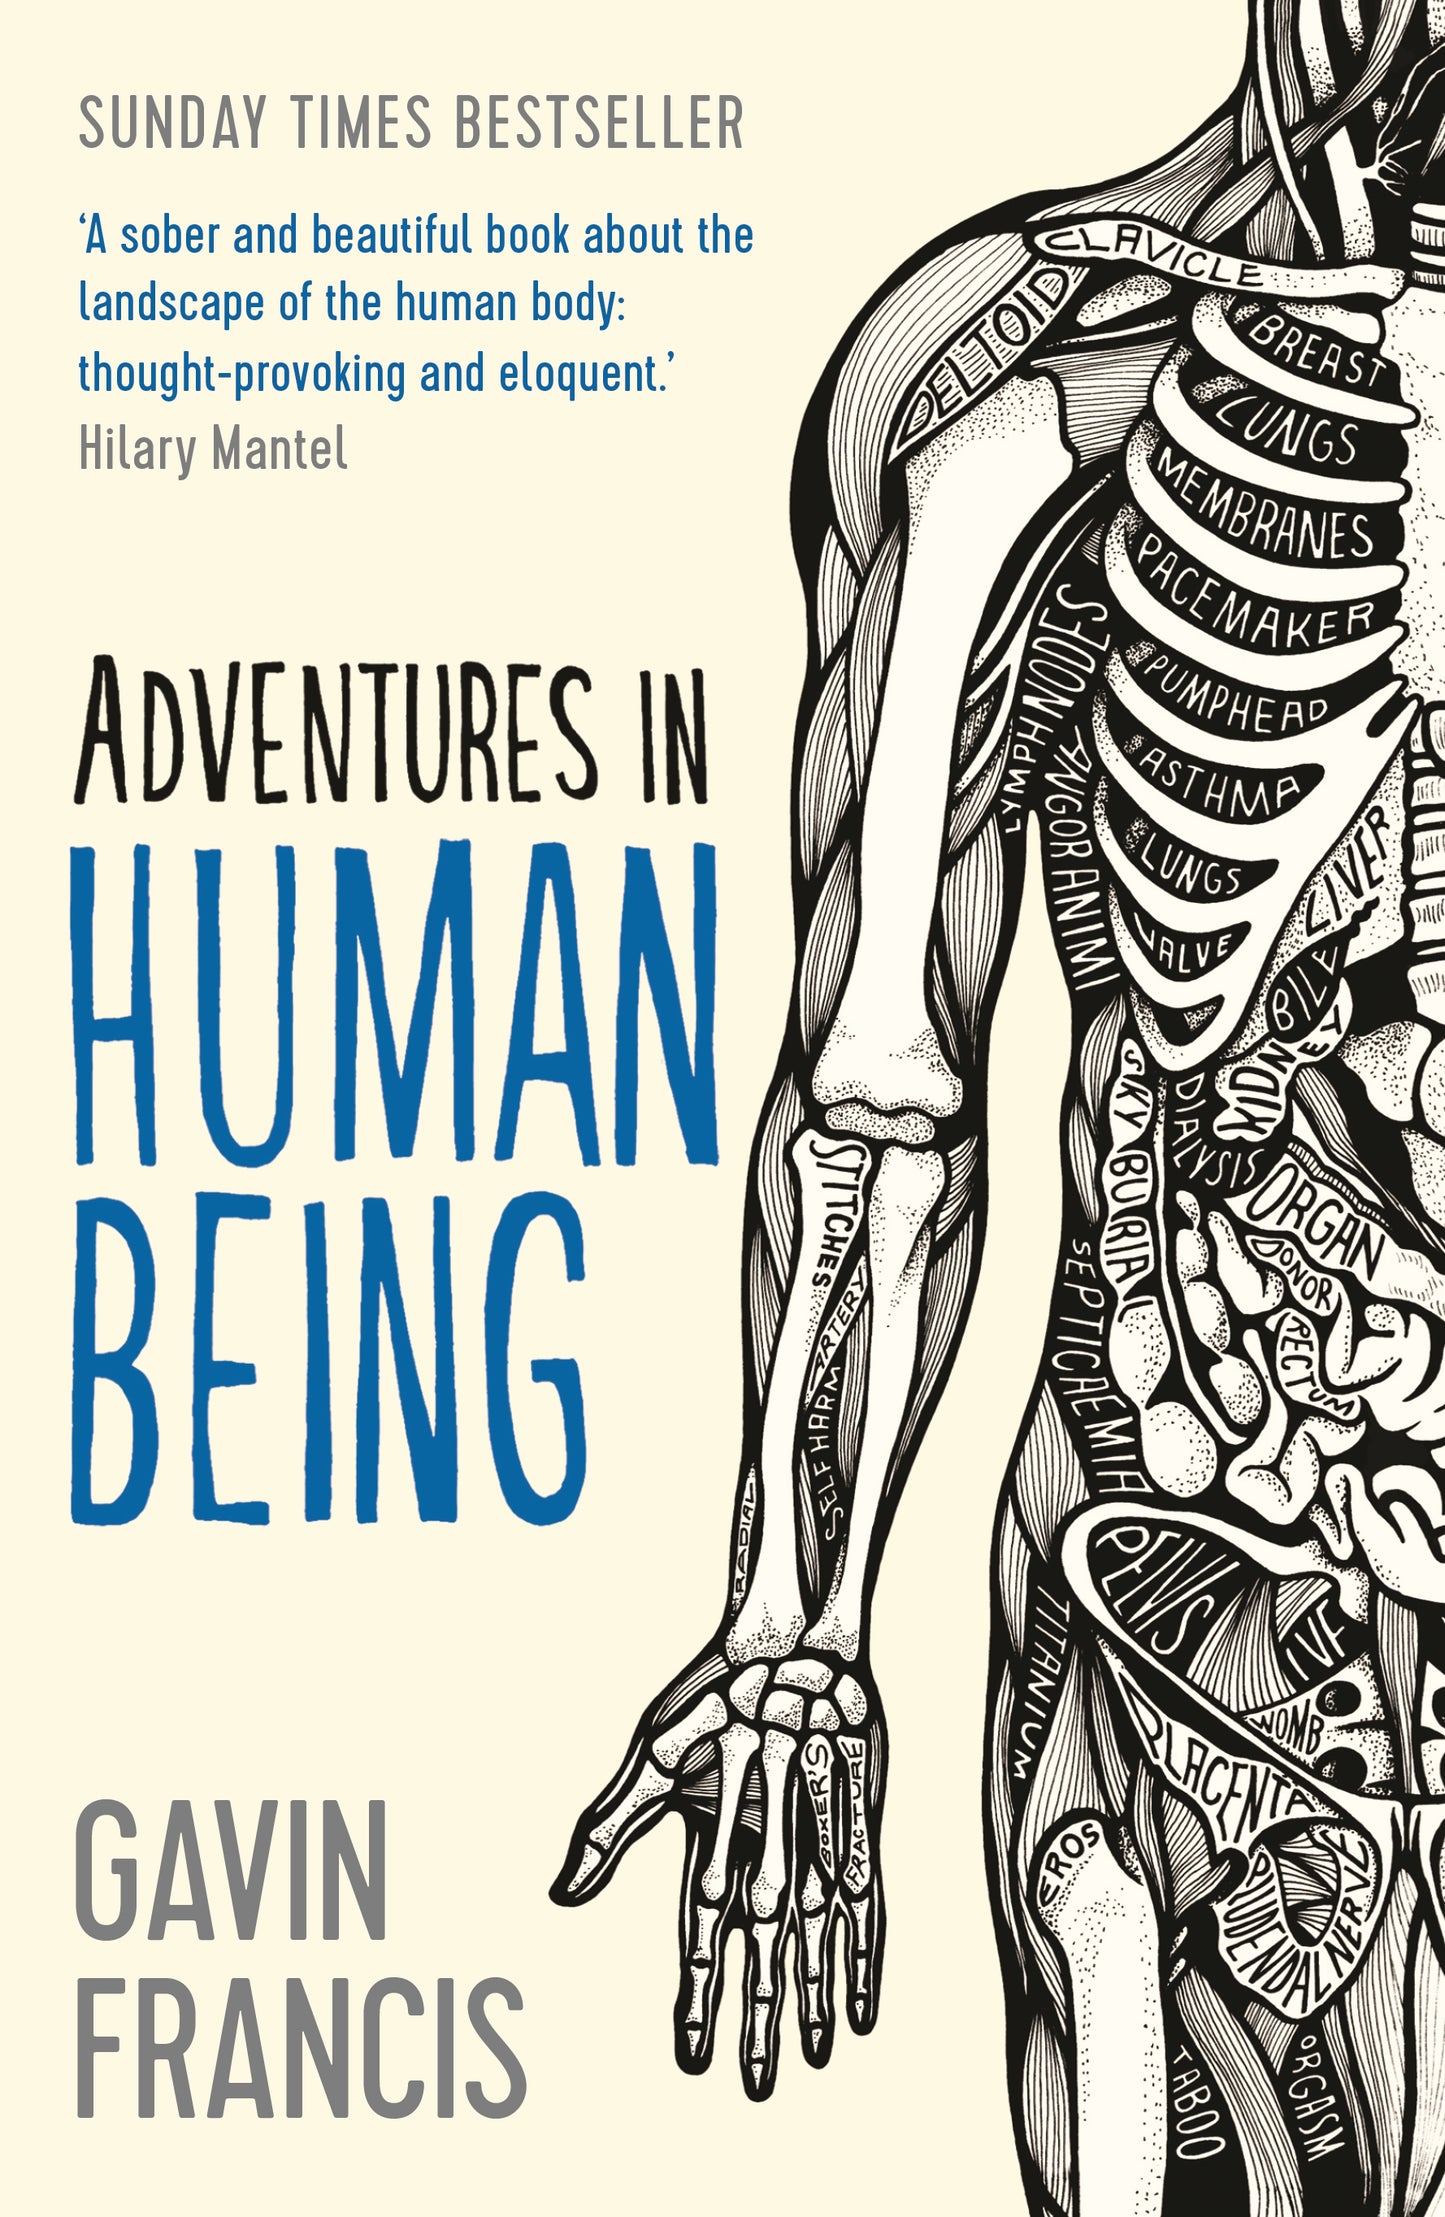 Adventures in Human Being.  By Gavin Francis.  A SUNDAY TIMES BEST SELLER